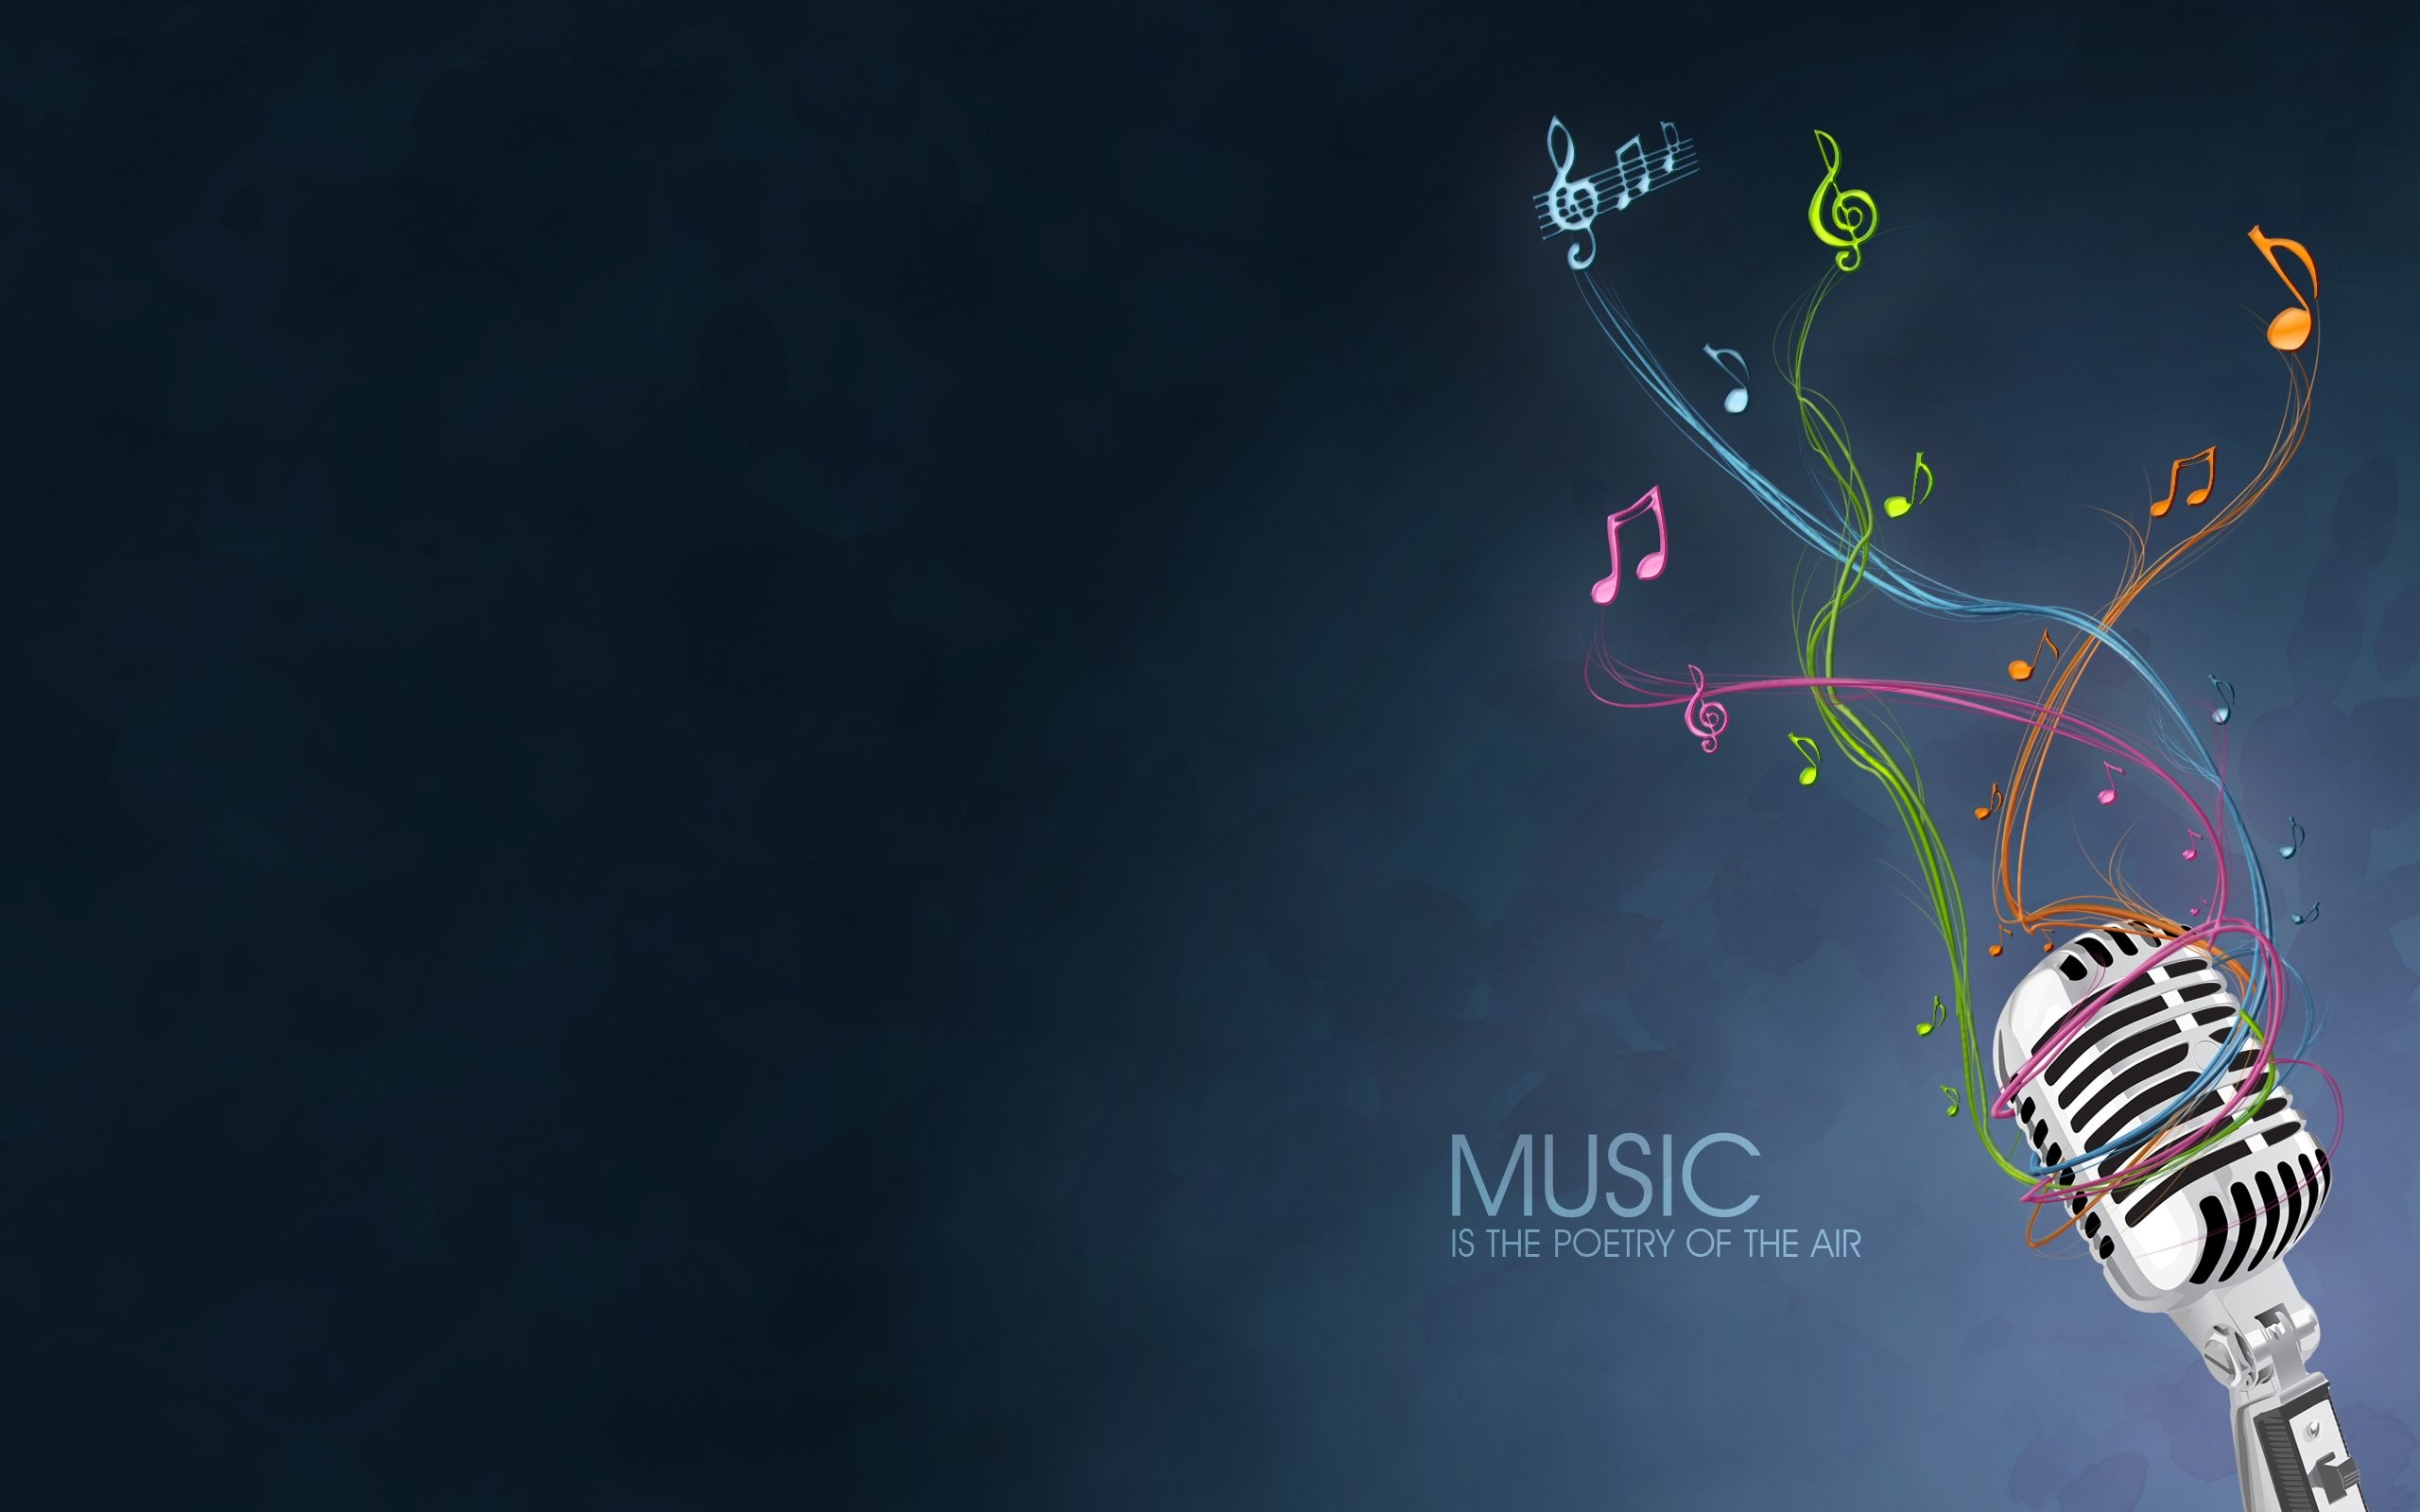 2560x1600 Music Notes Wallpaper 9815 Hd Wallpapers in Music - Imagesci.com